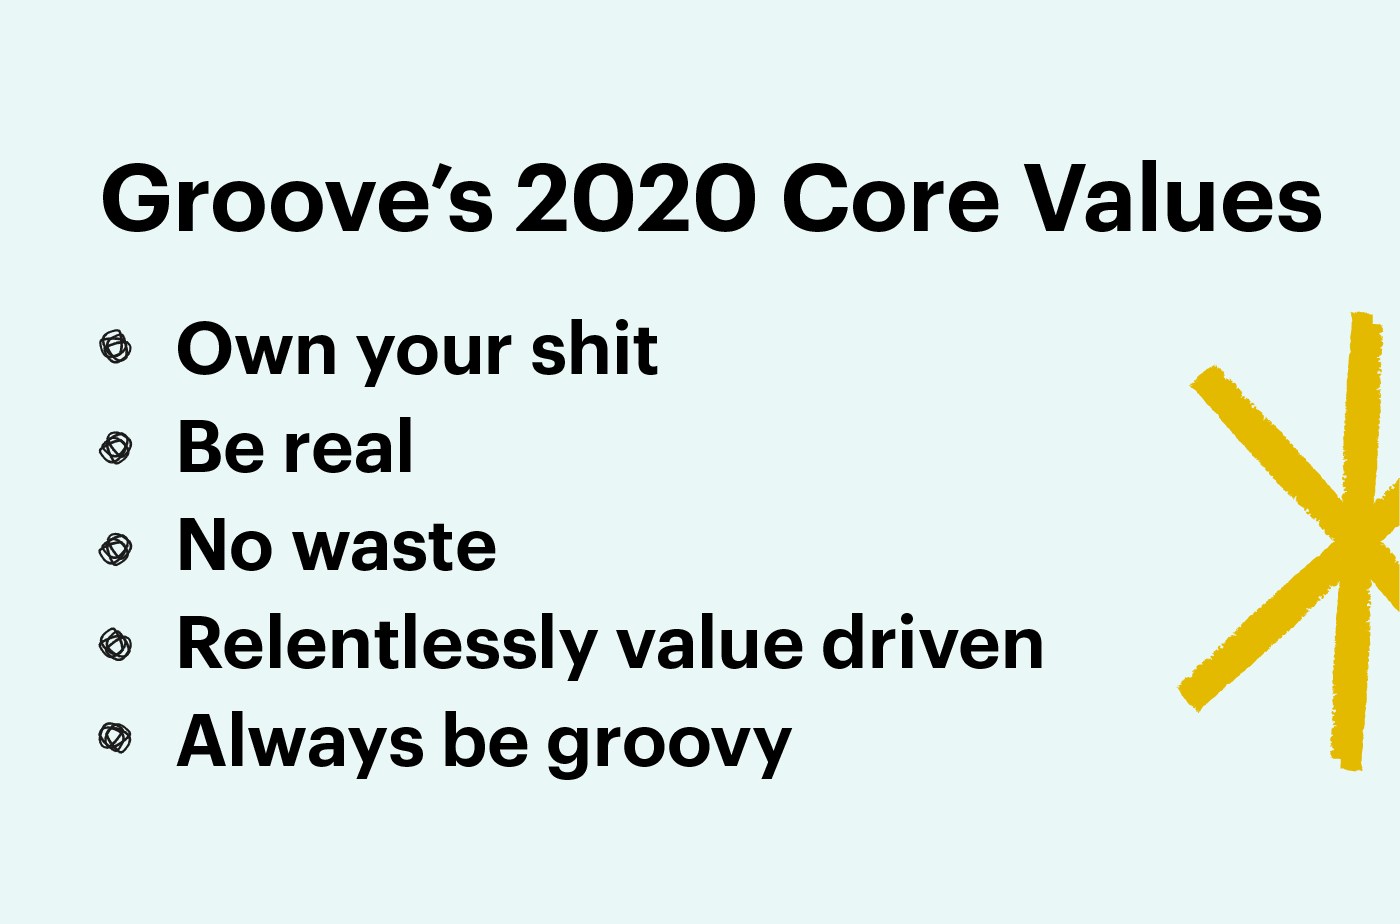 grooves core values for small business customer service